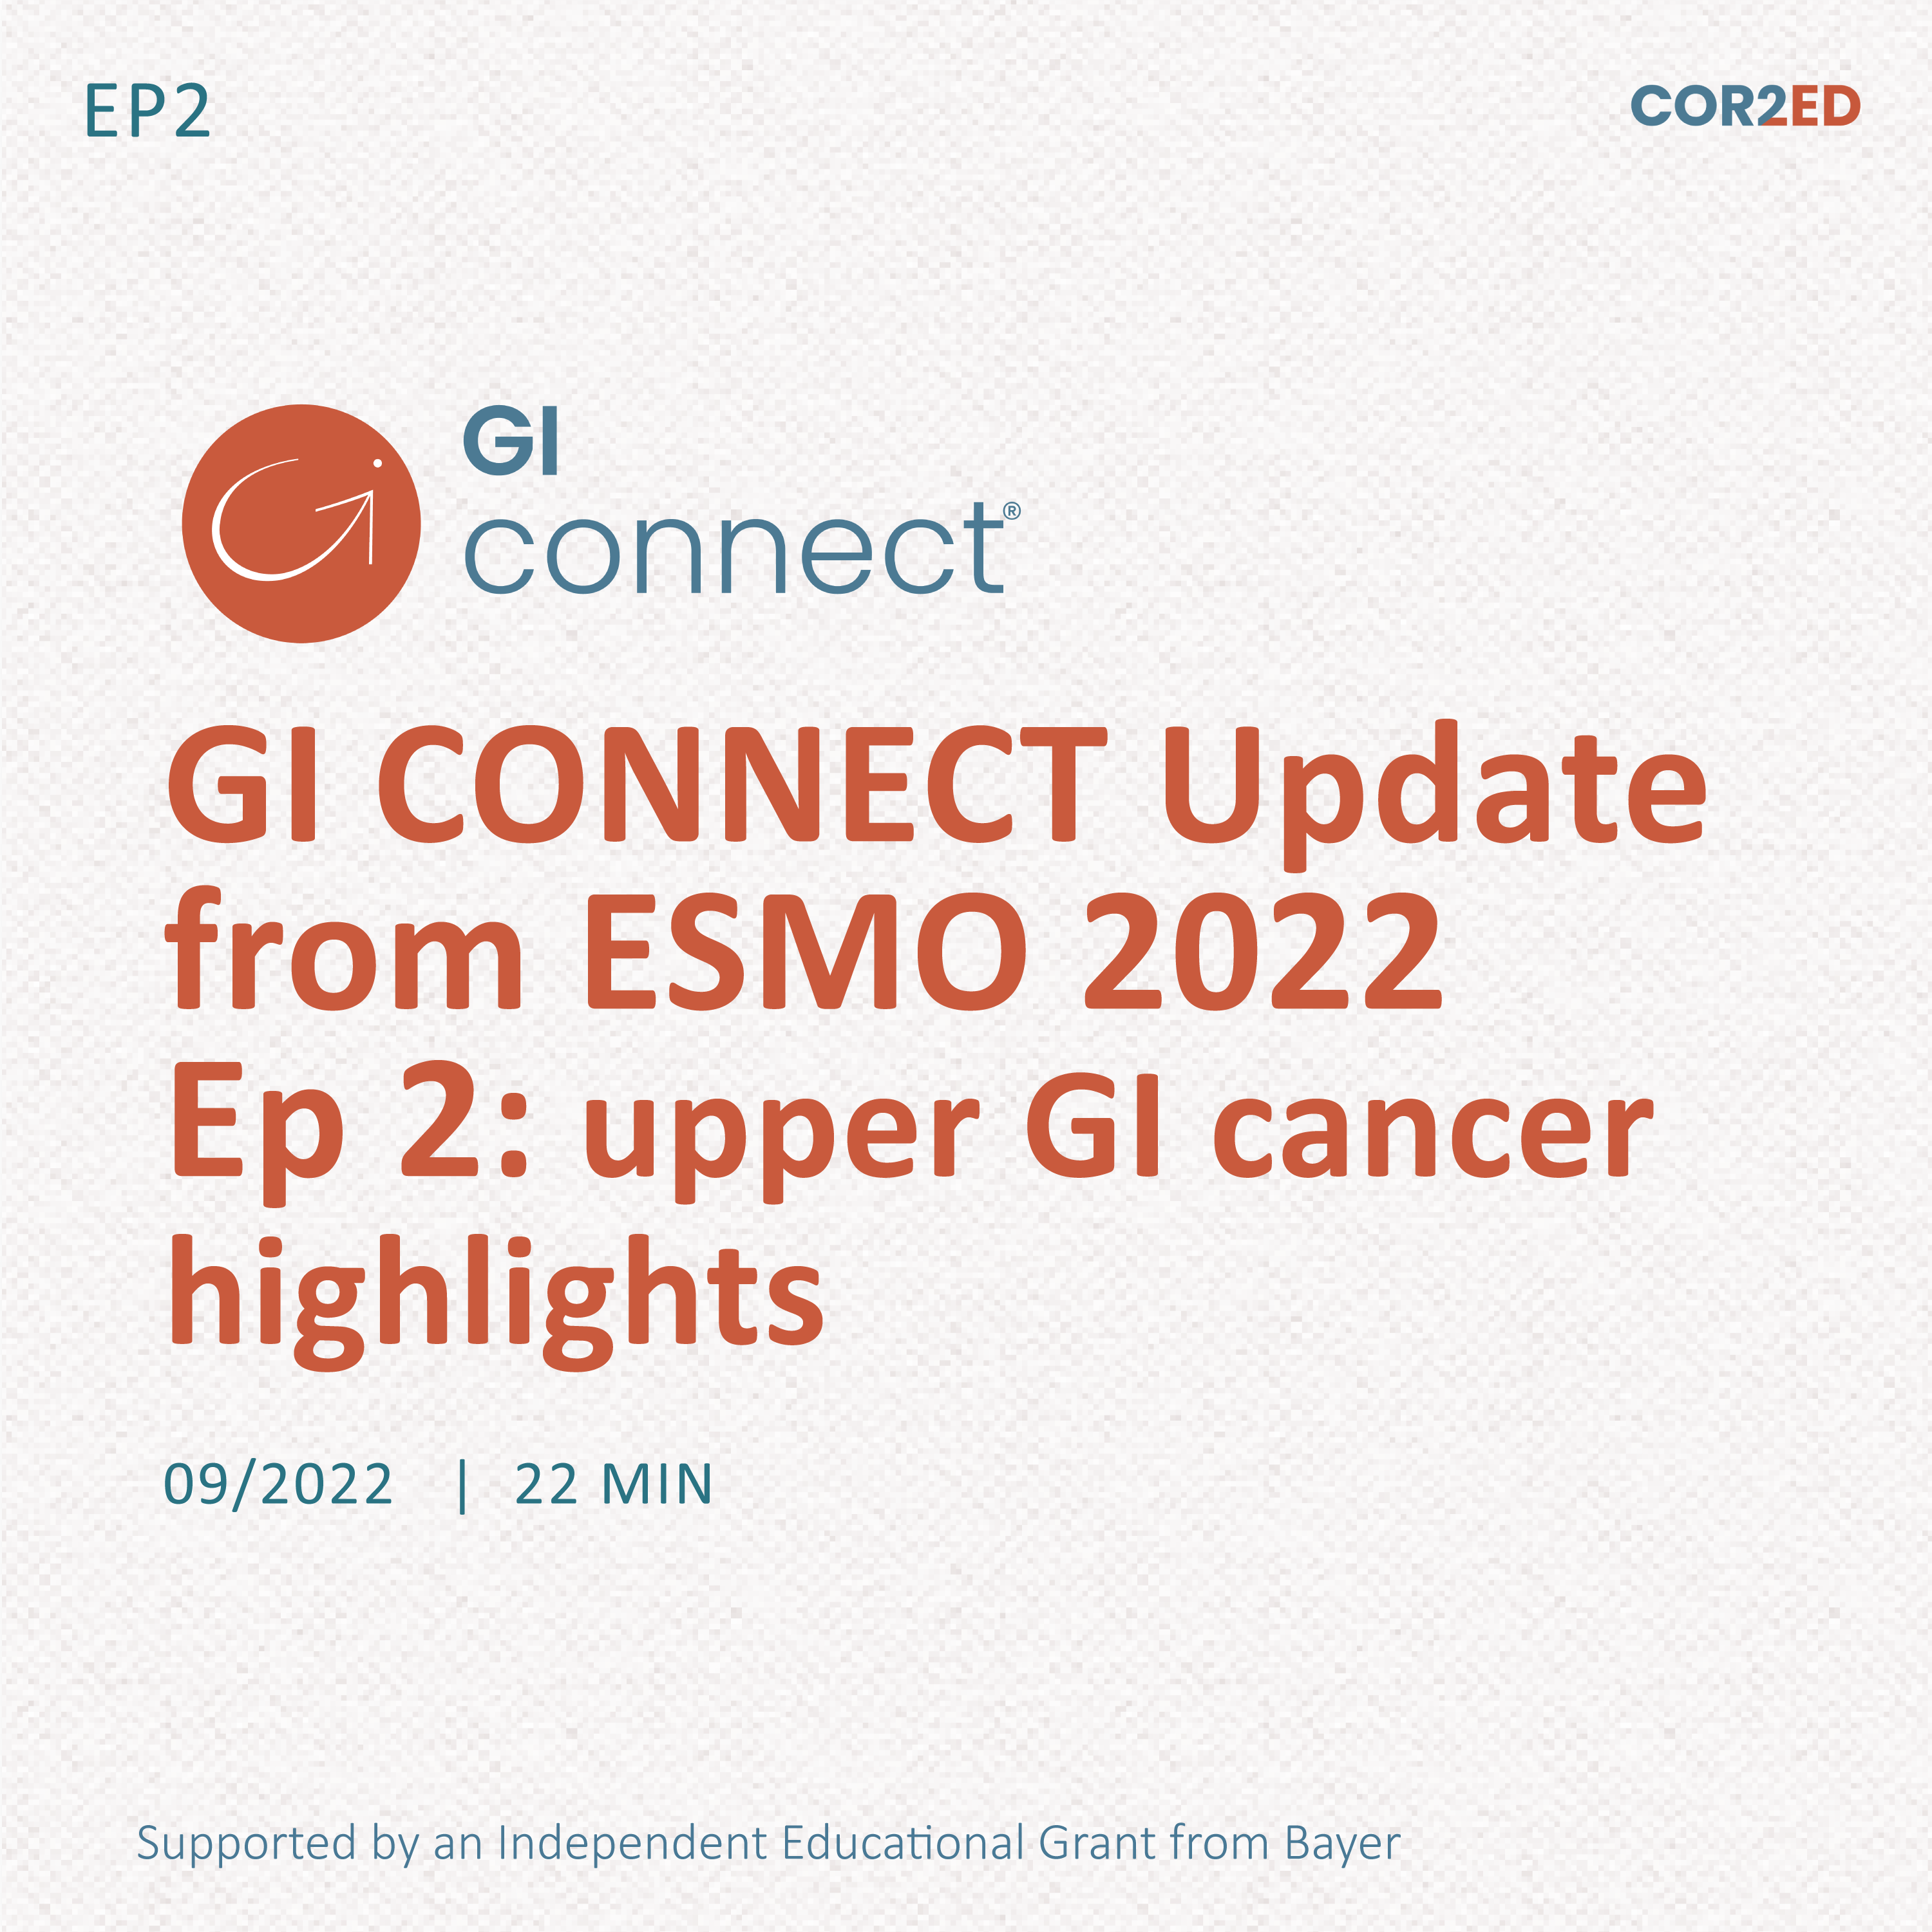 GI CONNECT Update from ESMO 2022 Ep 2: upper GI cancer highlights